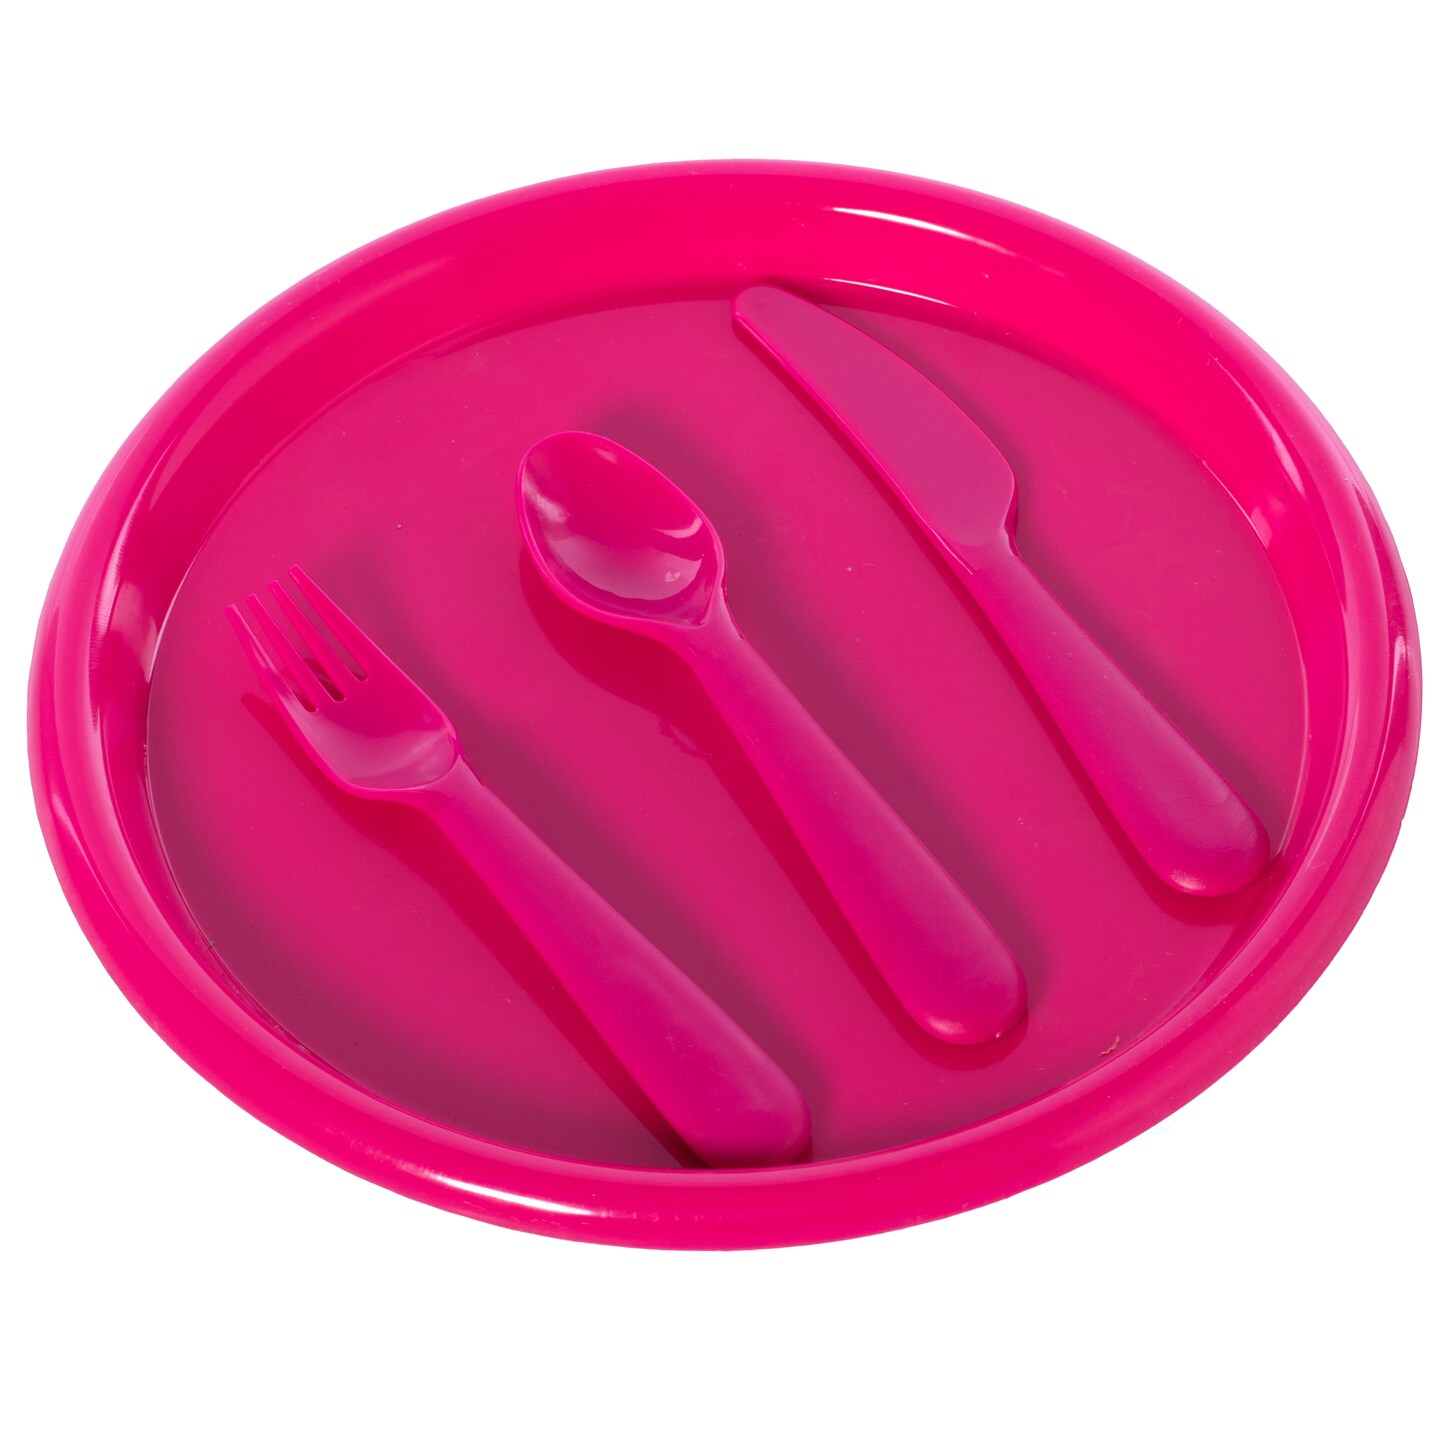 Reusable Cutlery Set of 4 Plastic Plates, Spoons, Forks and Knives for Baby and Toddlers